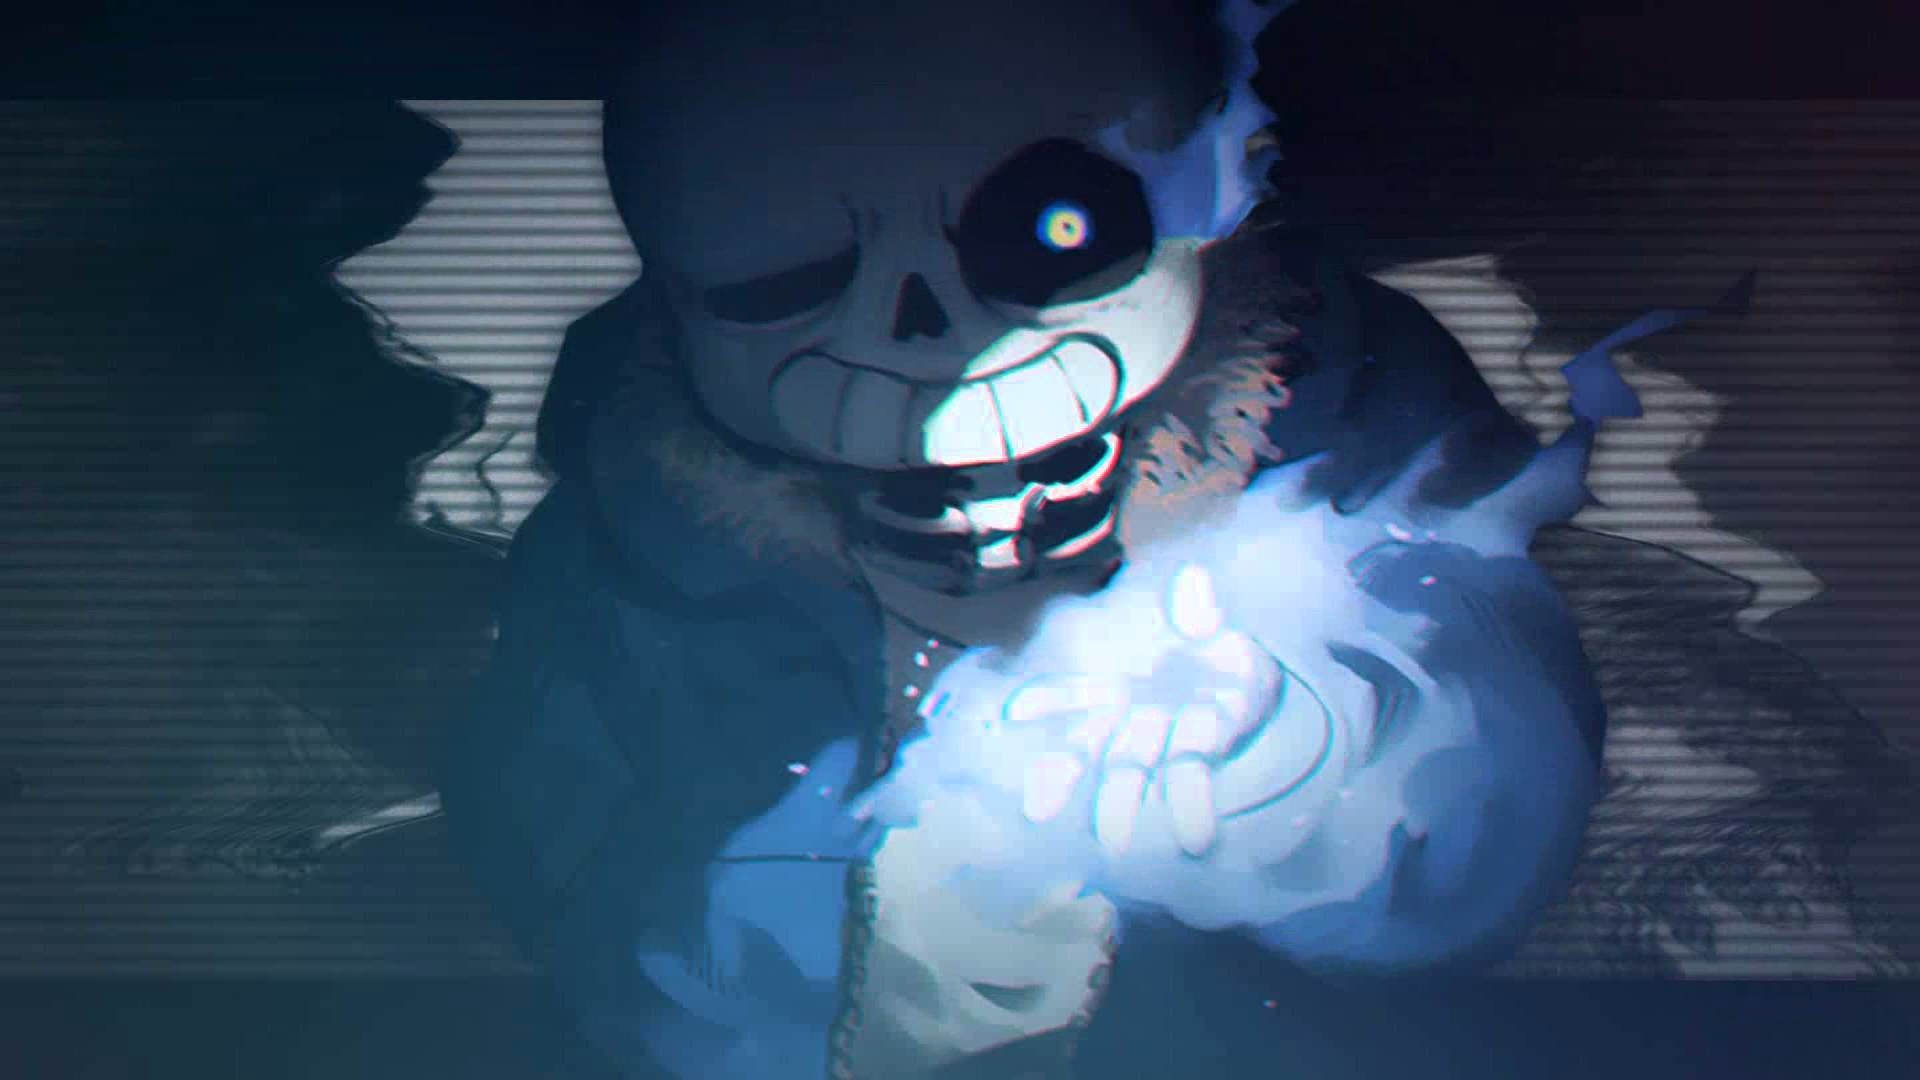 Sans Undertale Wallpapers Hd posted by Samantha Simpson